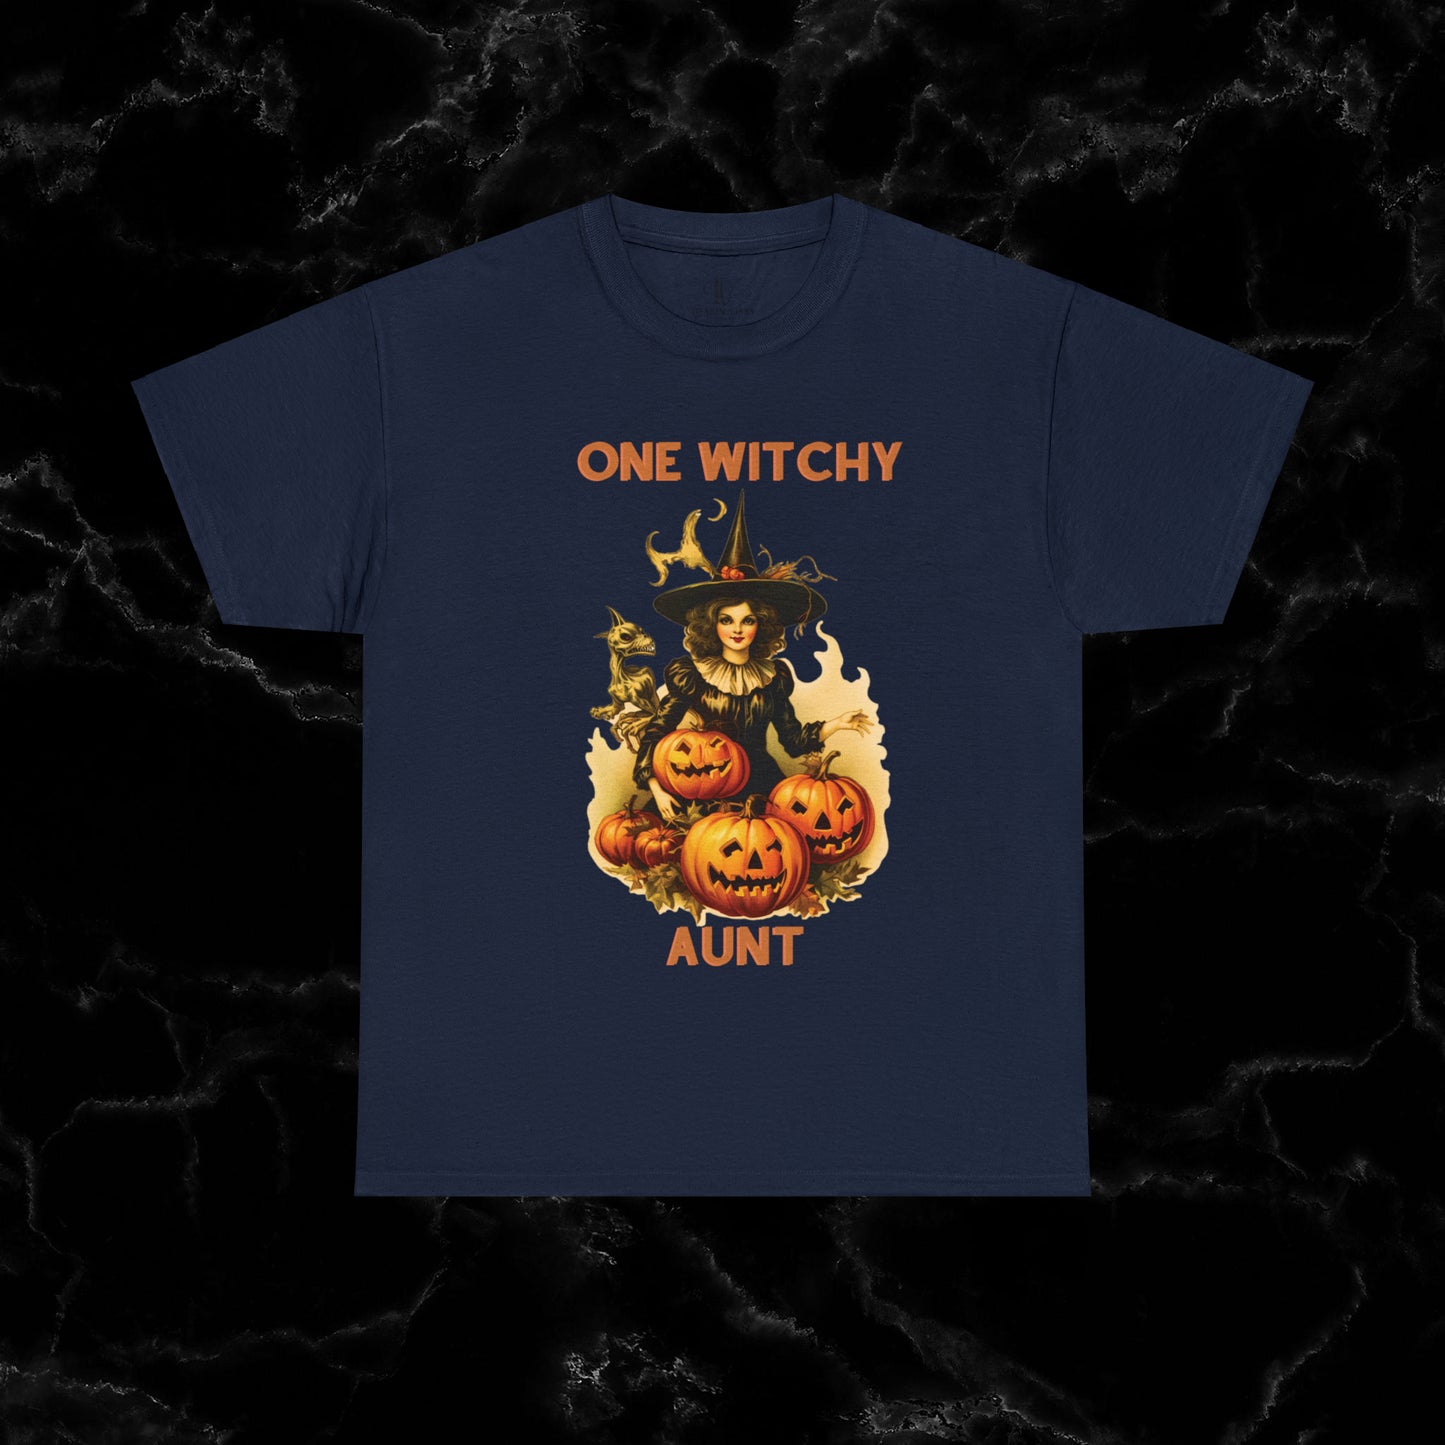 One Witchy Auntie Cotton T-Shirt - Cool Aunt, Aunt Halloween, Perfect Gift for Aunts T-Shirt Navy S 